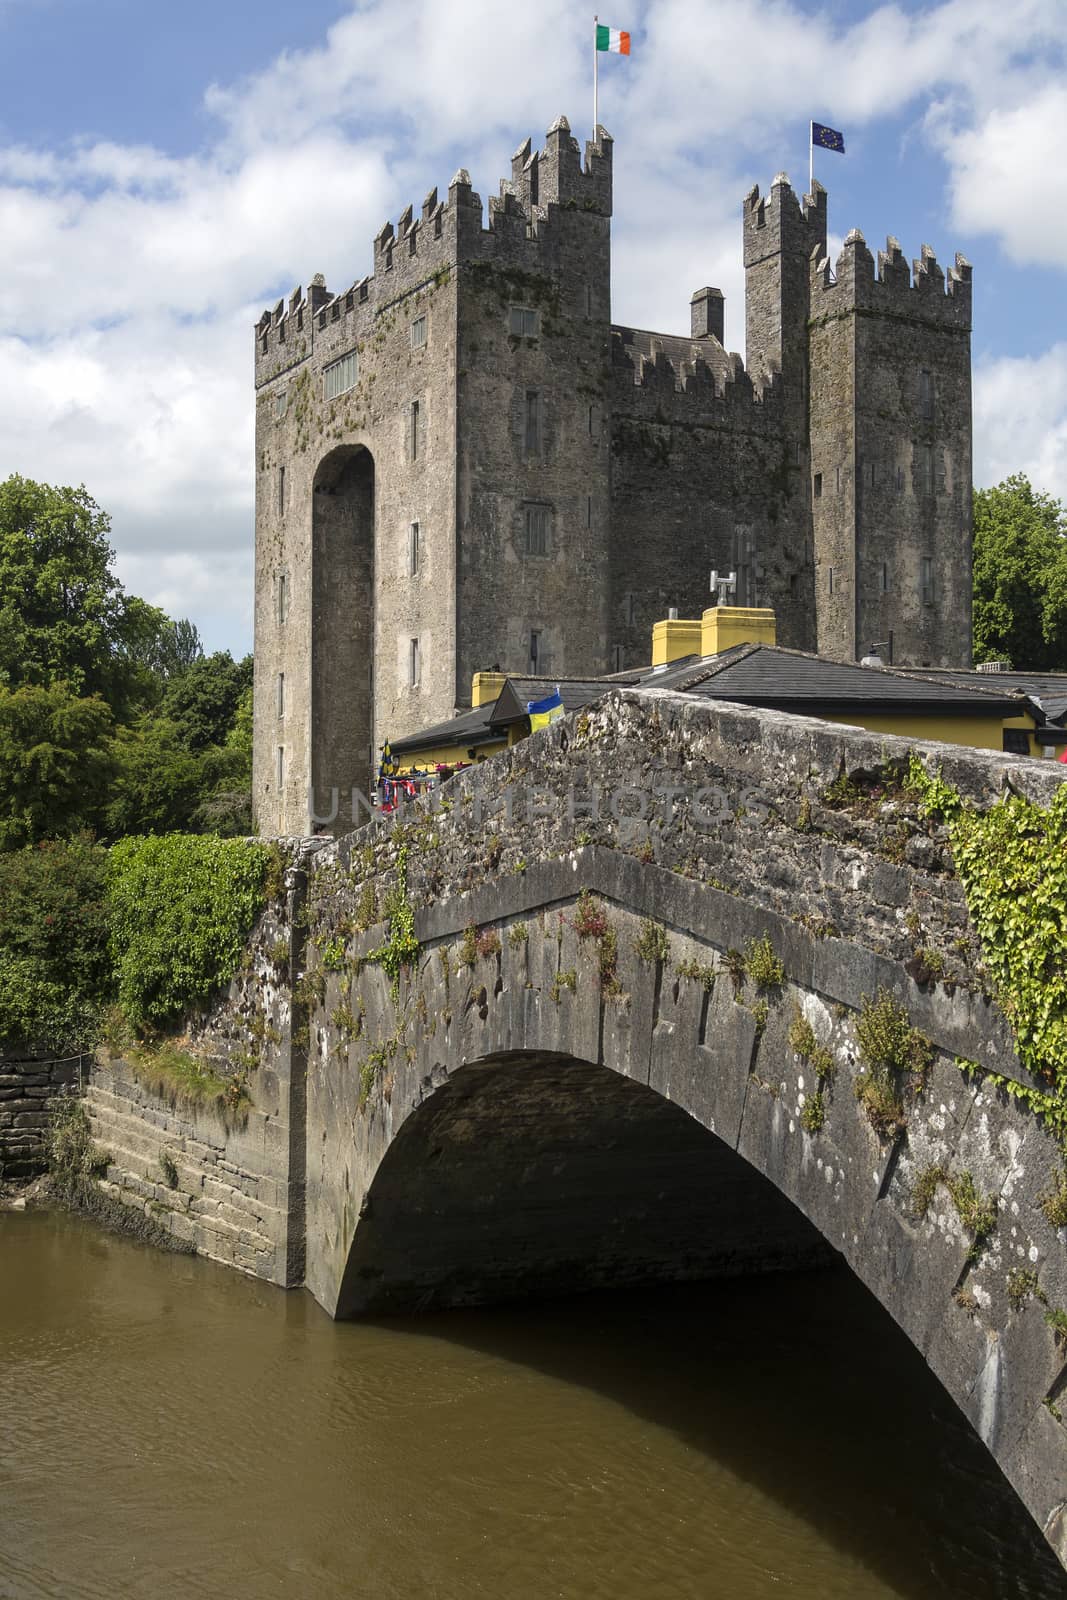 Bunratty Castle is a large 15th-century tower house in County Clare in the Republic of Ireland. It is located in the center of Bunratty village, the castle dates from 1425. The castle and the adjoining folk park are run by Shannon Heritage as tourist attractions.